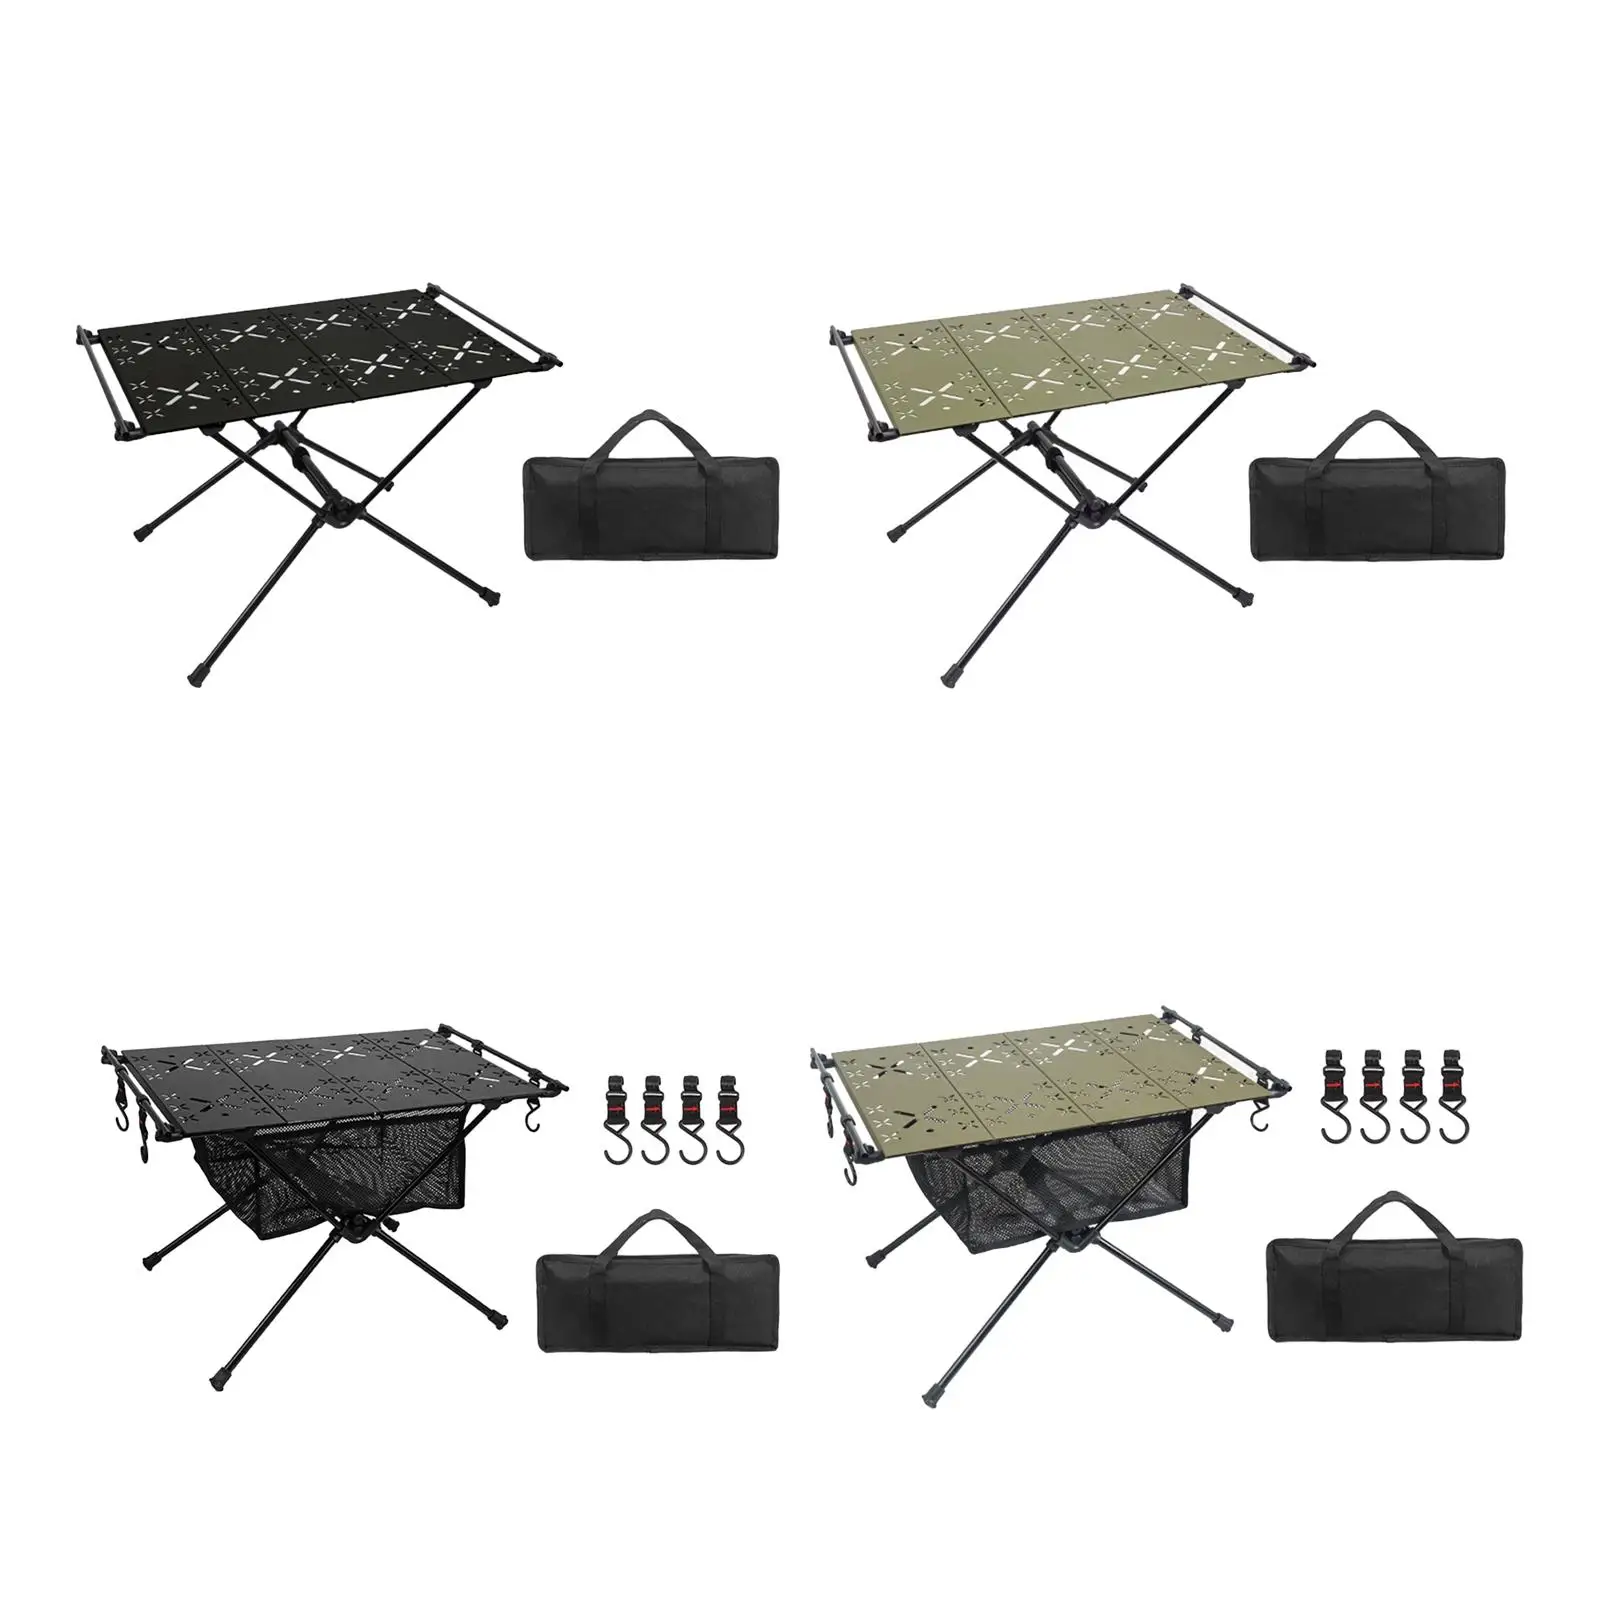 Foldable Camping Table Aluminum Alloy Camp Table Portable Desk Outdoor Foldable Table for Garden Picnic Travel Backpacking